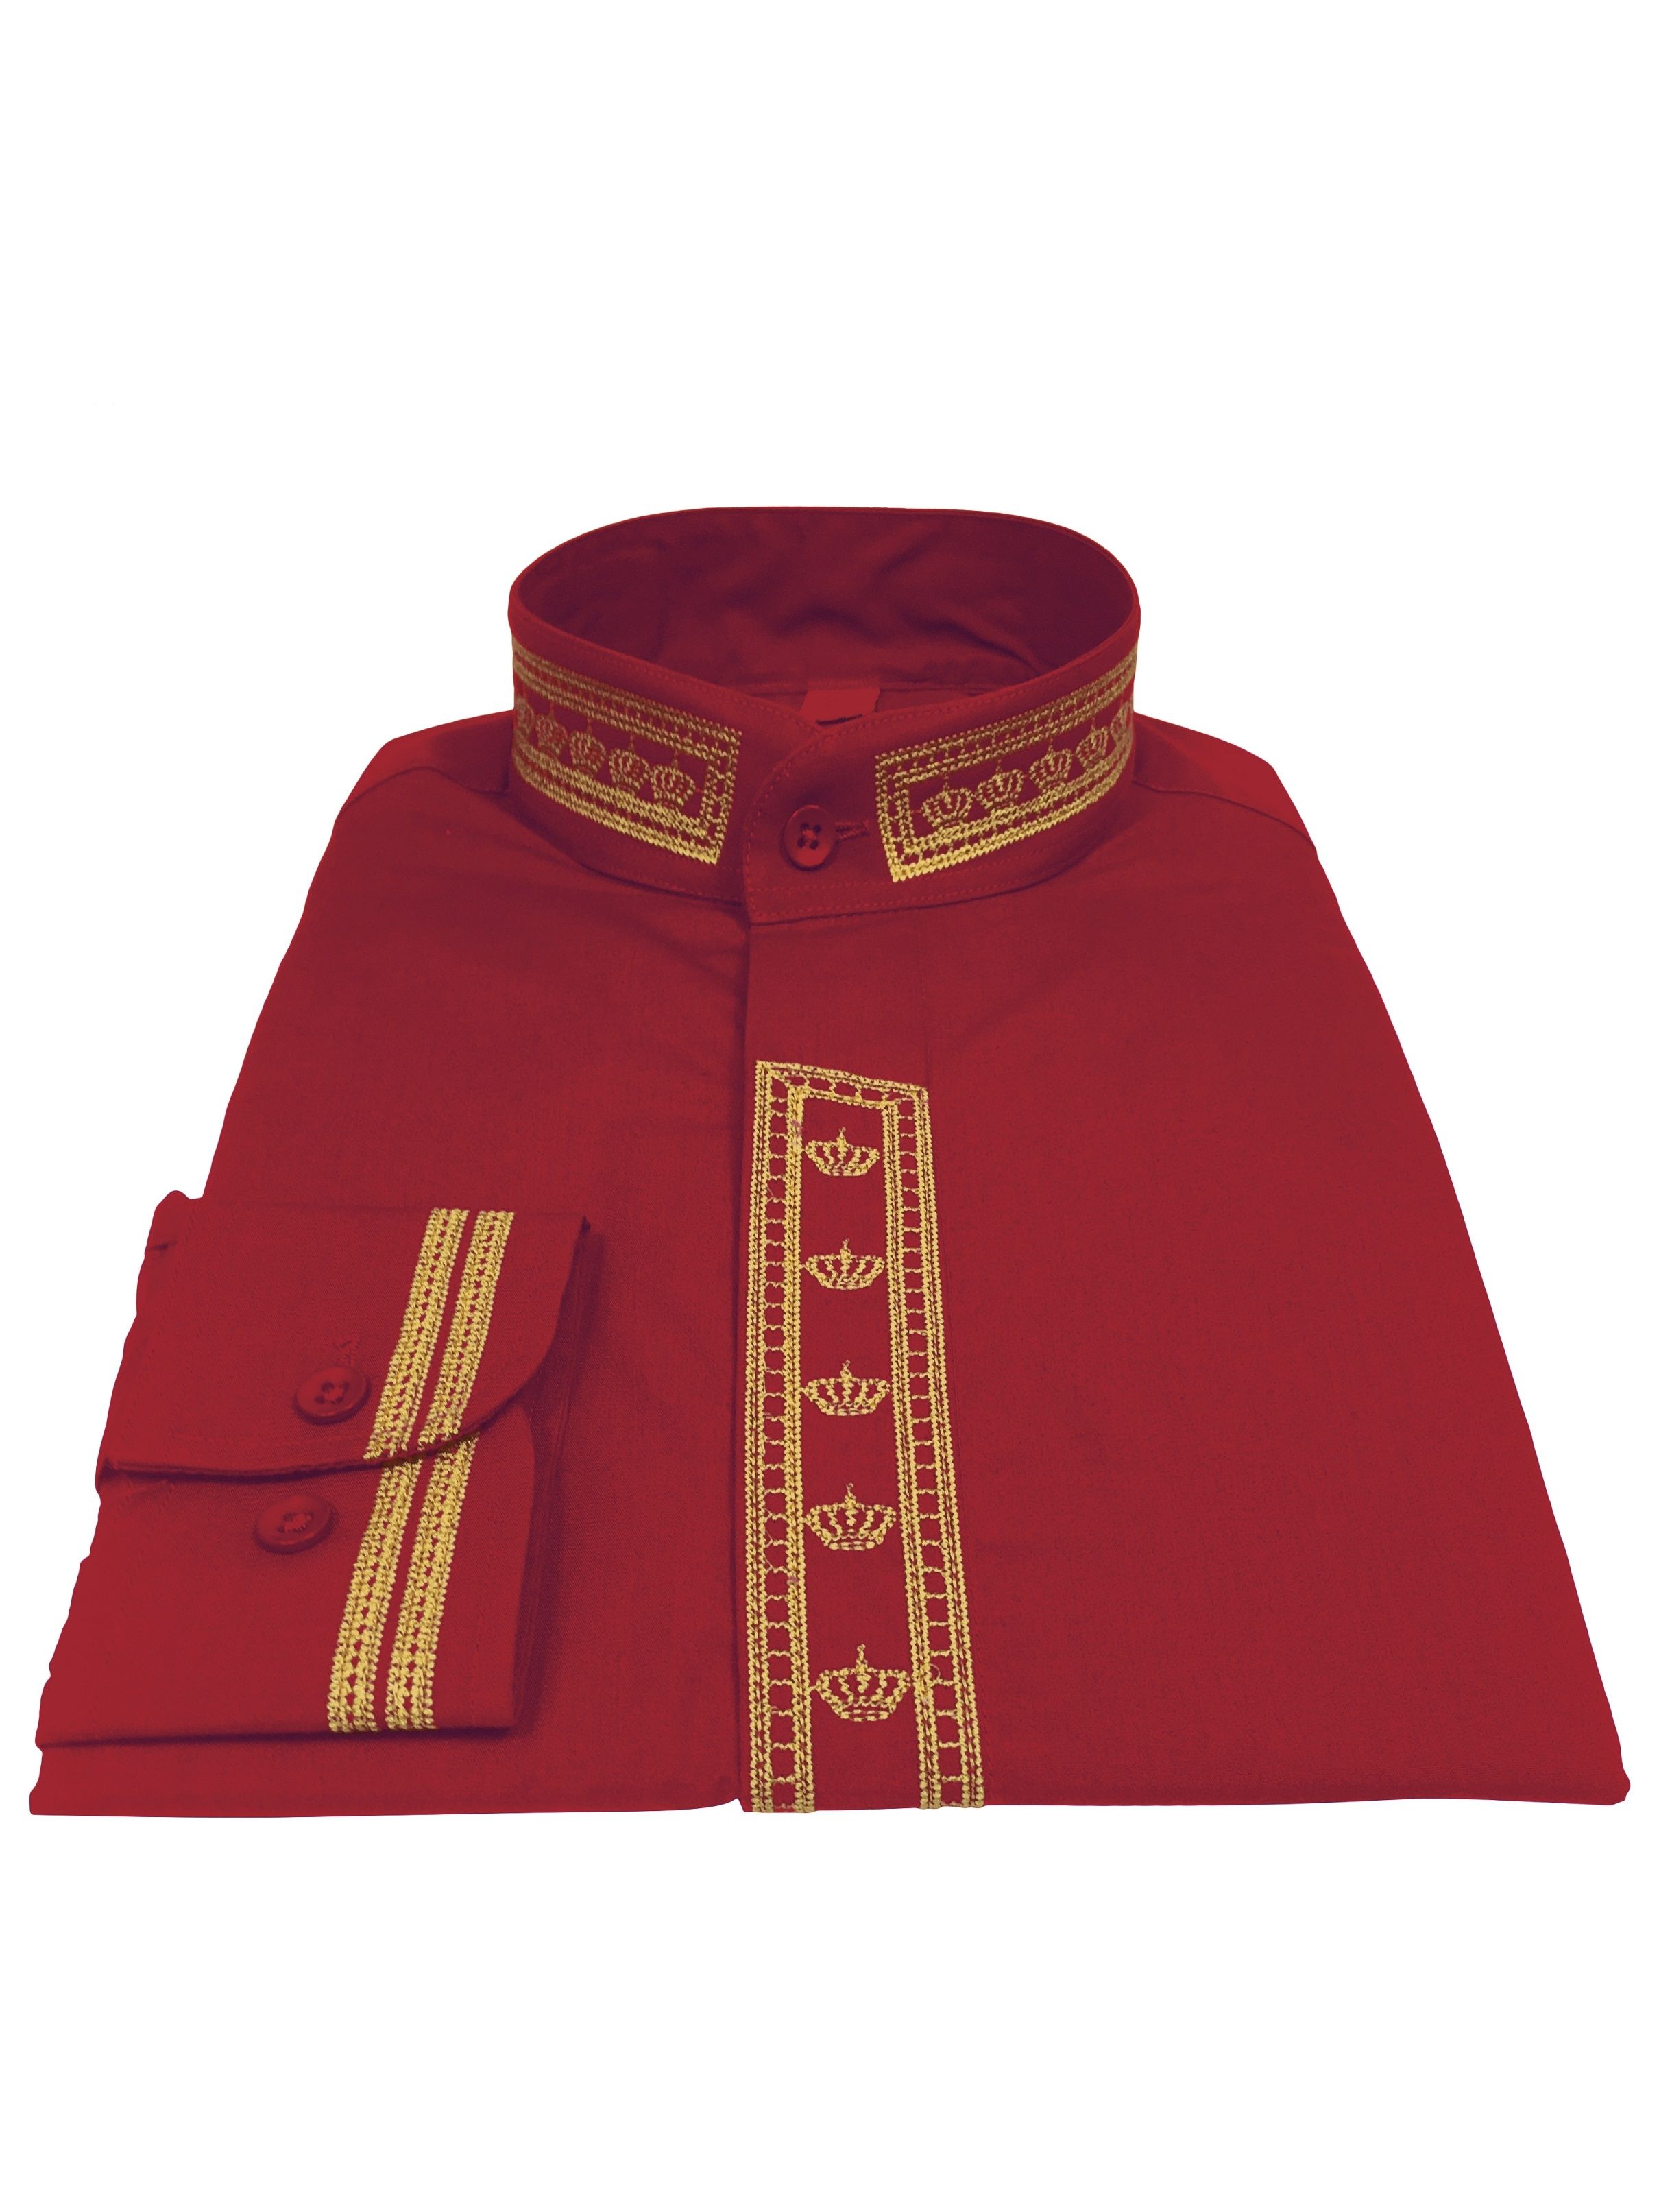 348. Men's Clergy Shirt With Rejoice Crown Fine Embroidery Long Sleeves- Red/Gold